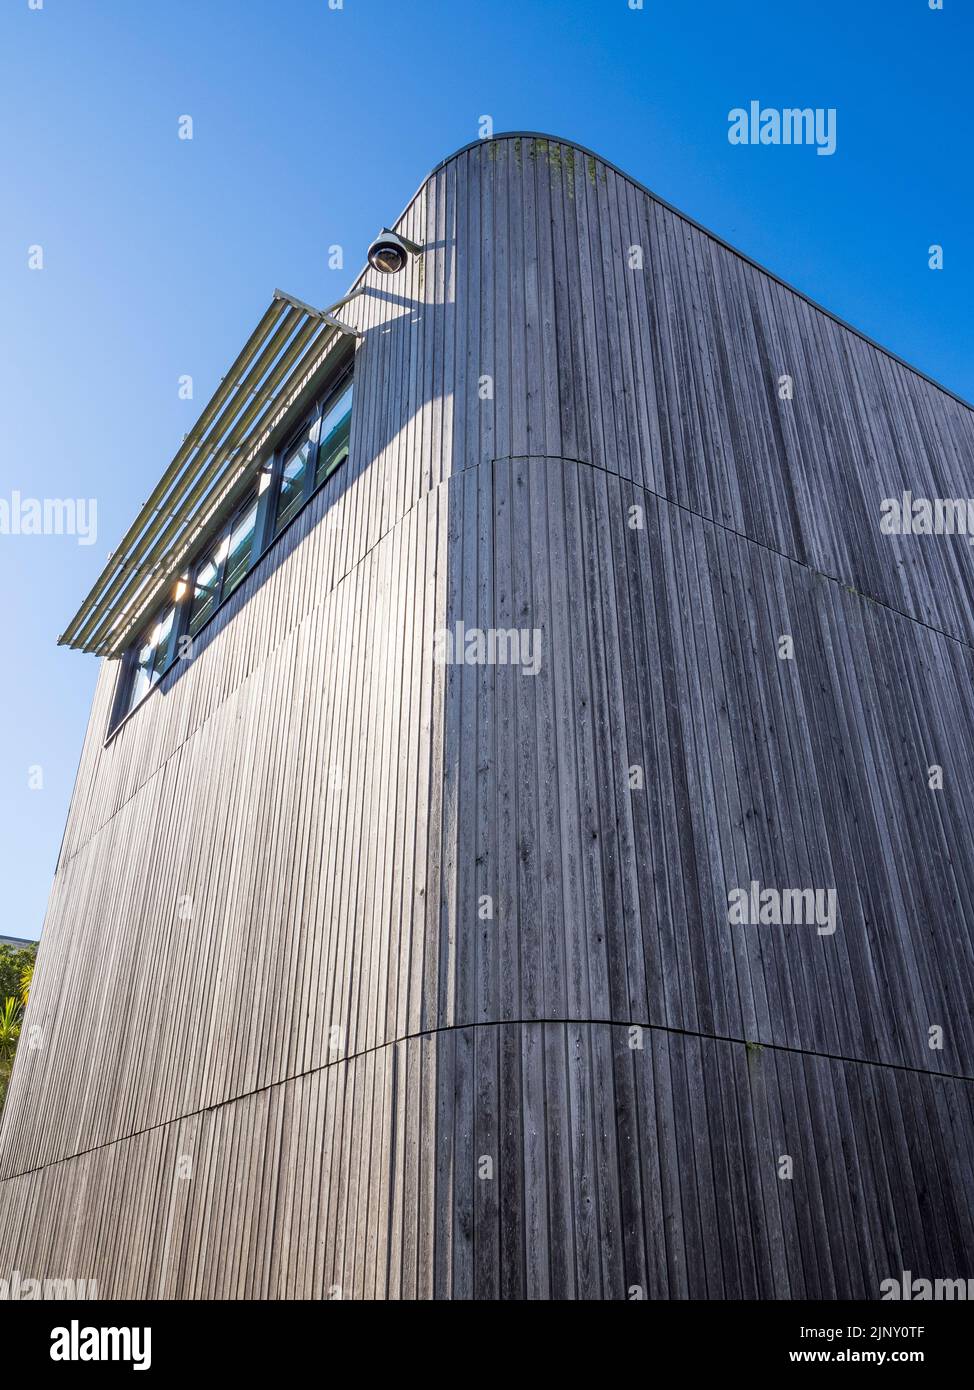 Institute of Photography, Studios, Gallery, Falmouth University, Penryn Campus, Falmouth, Cornwall, England, UK, GB. Stock Photo